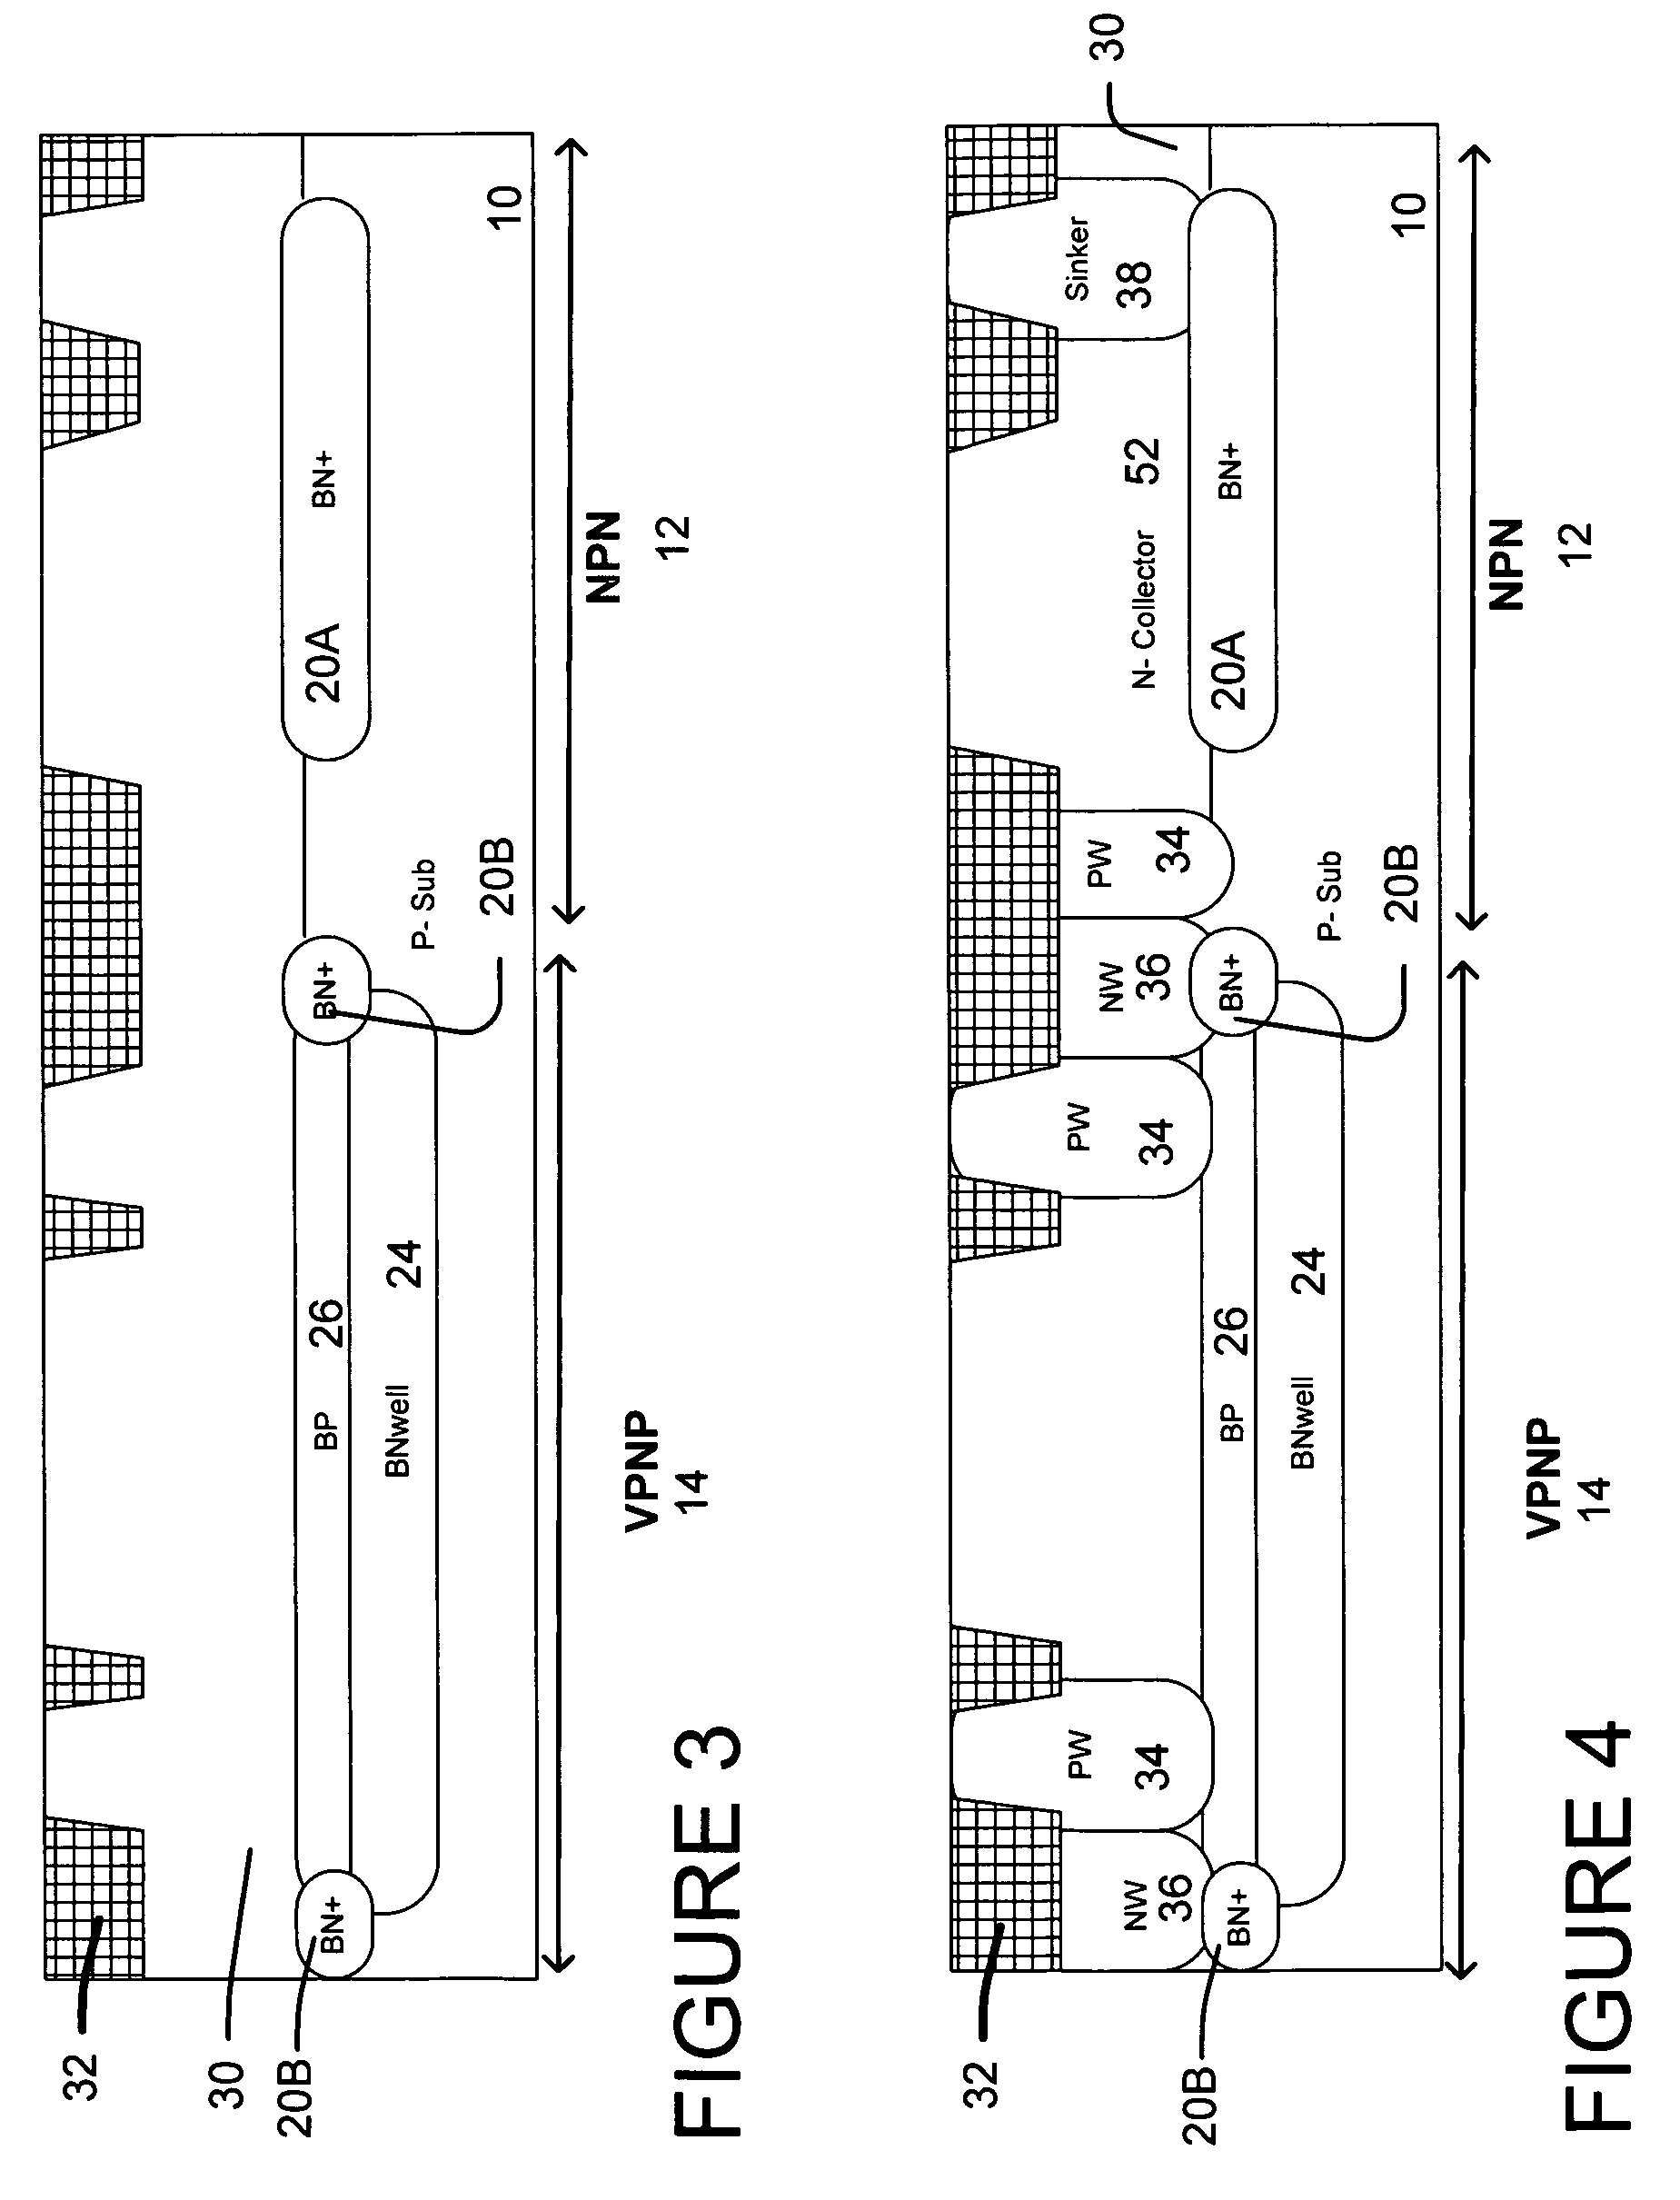 Self-aligned vertical PNP transistor for high performance SiGe CBiCMOS process